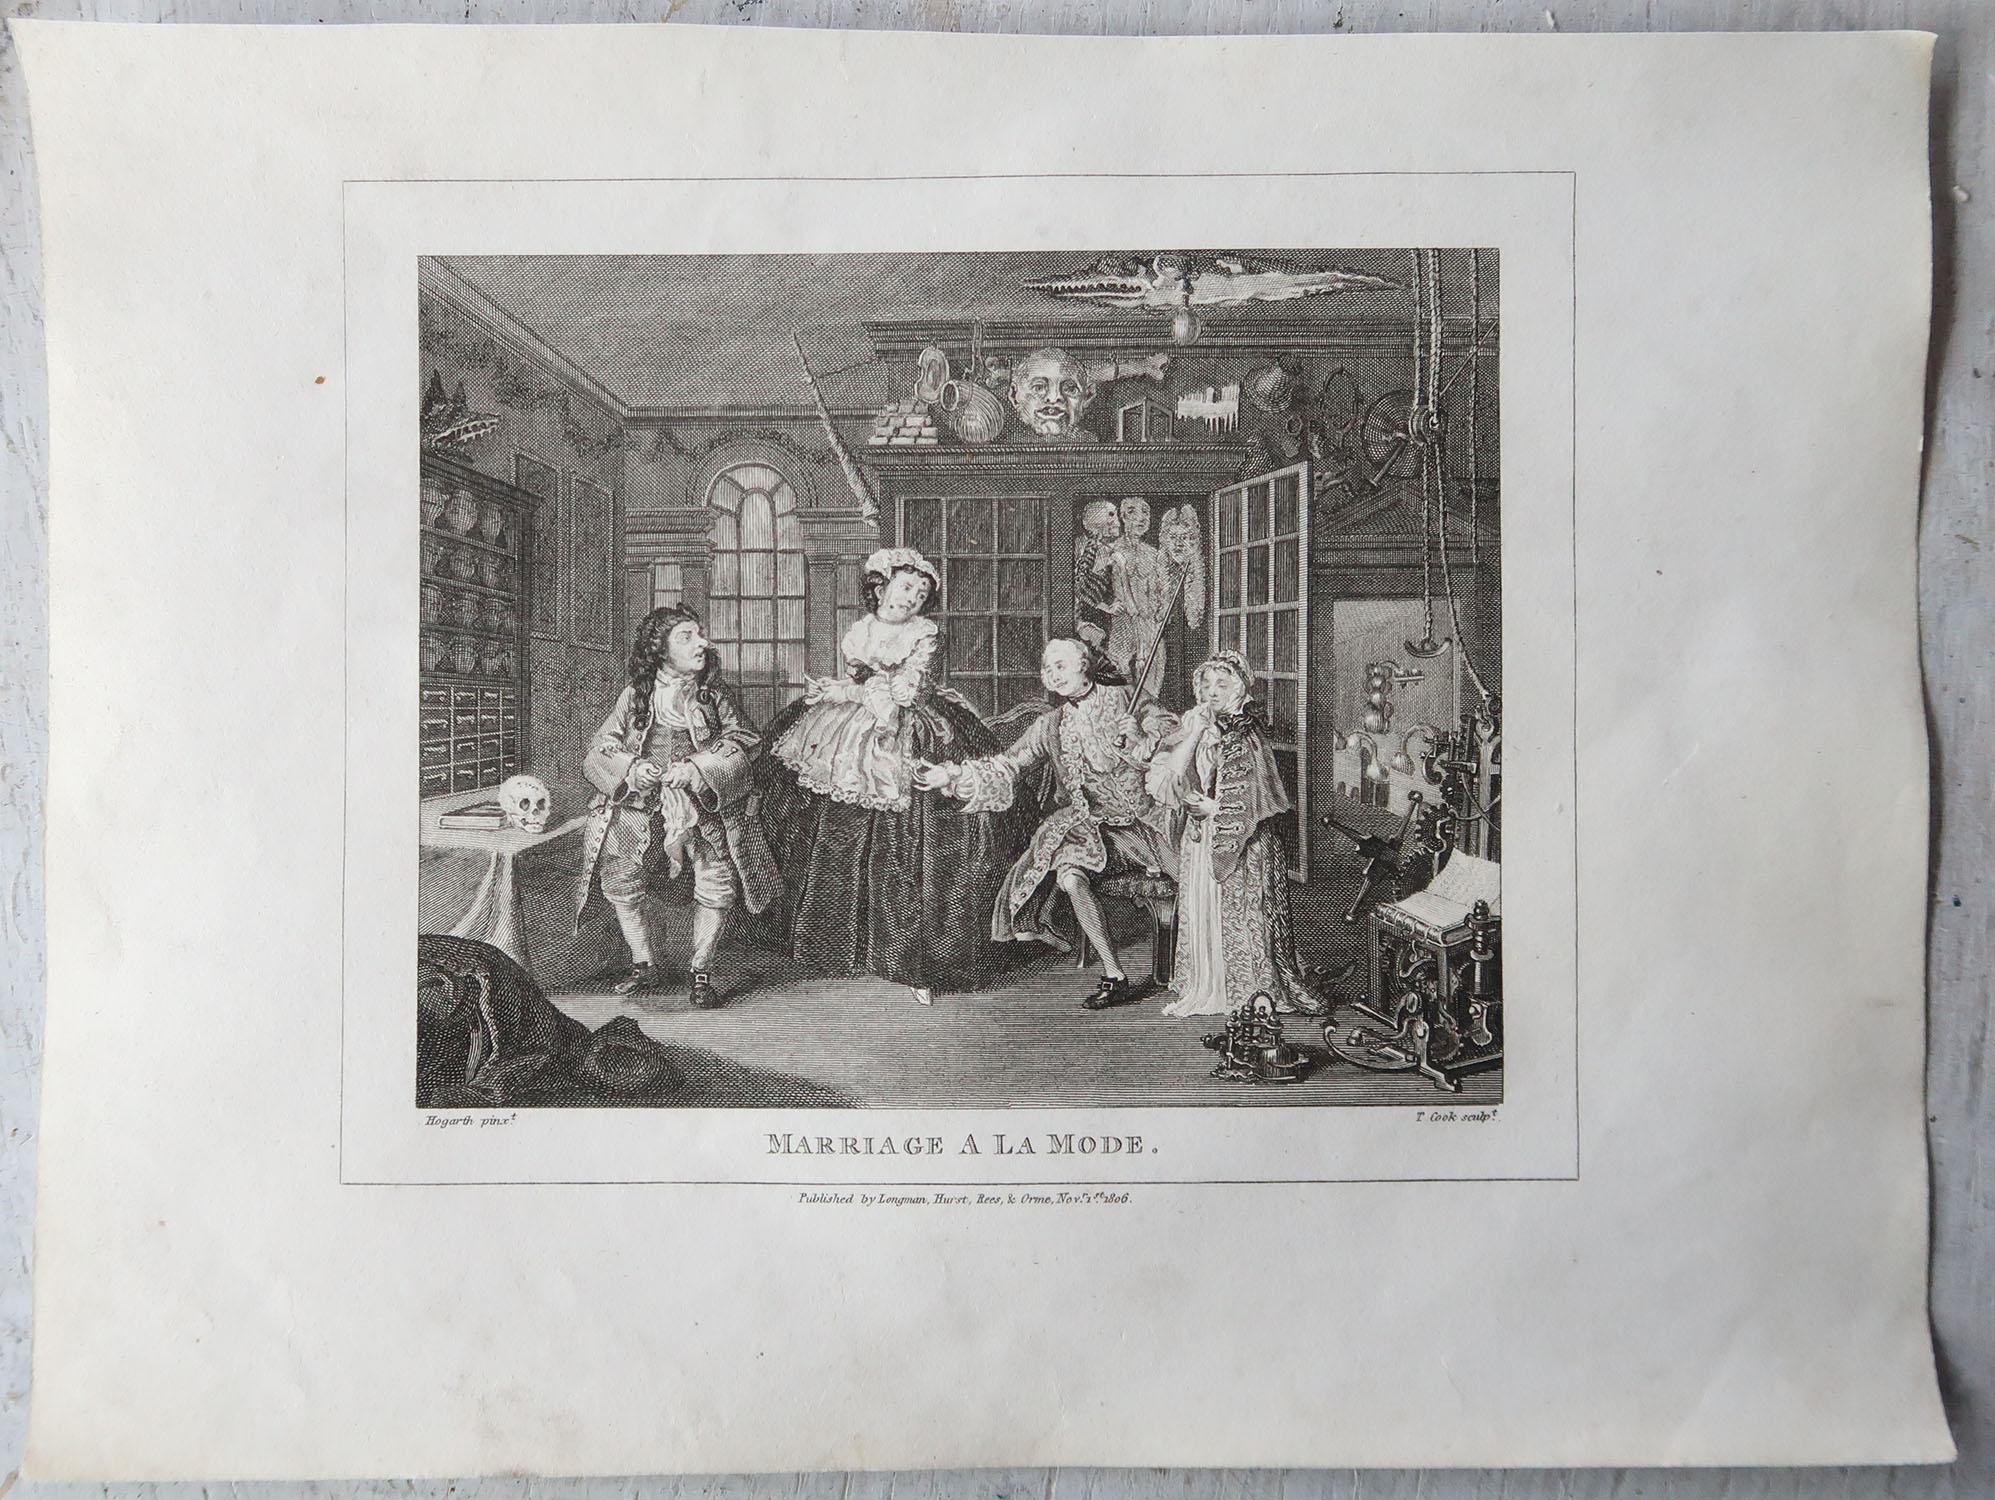 Wonderful set of Hogarth prints

This is the 